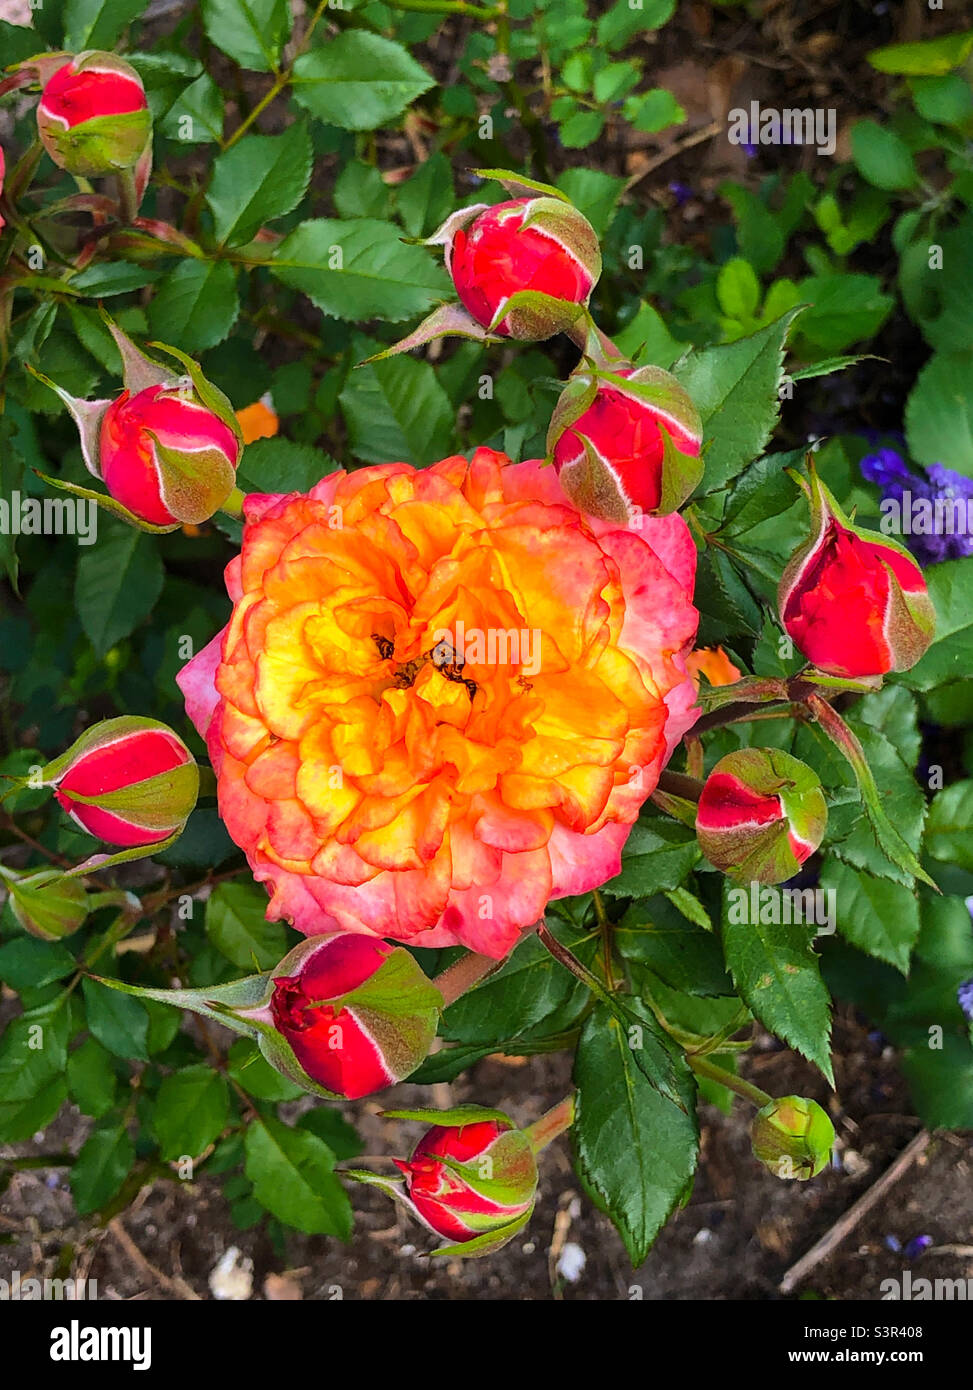 Single rose surrounded by rosebuds Stock Photo